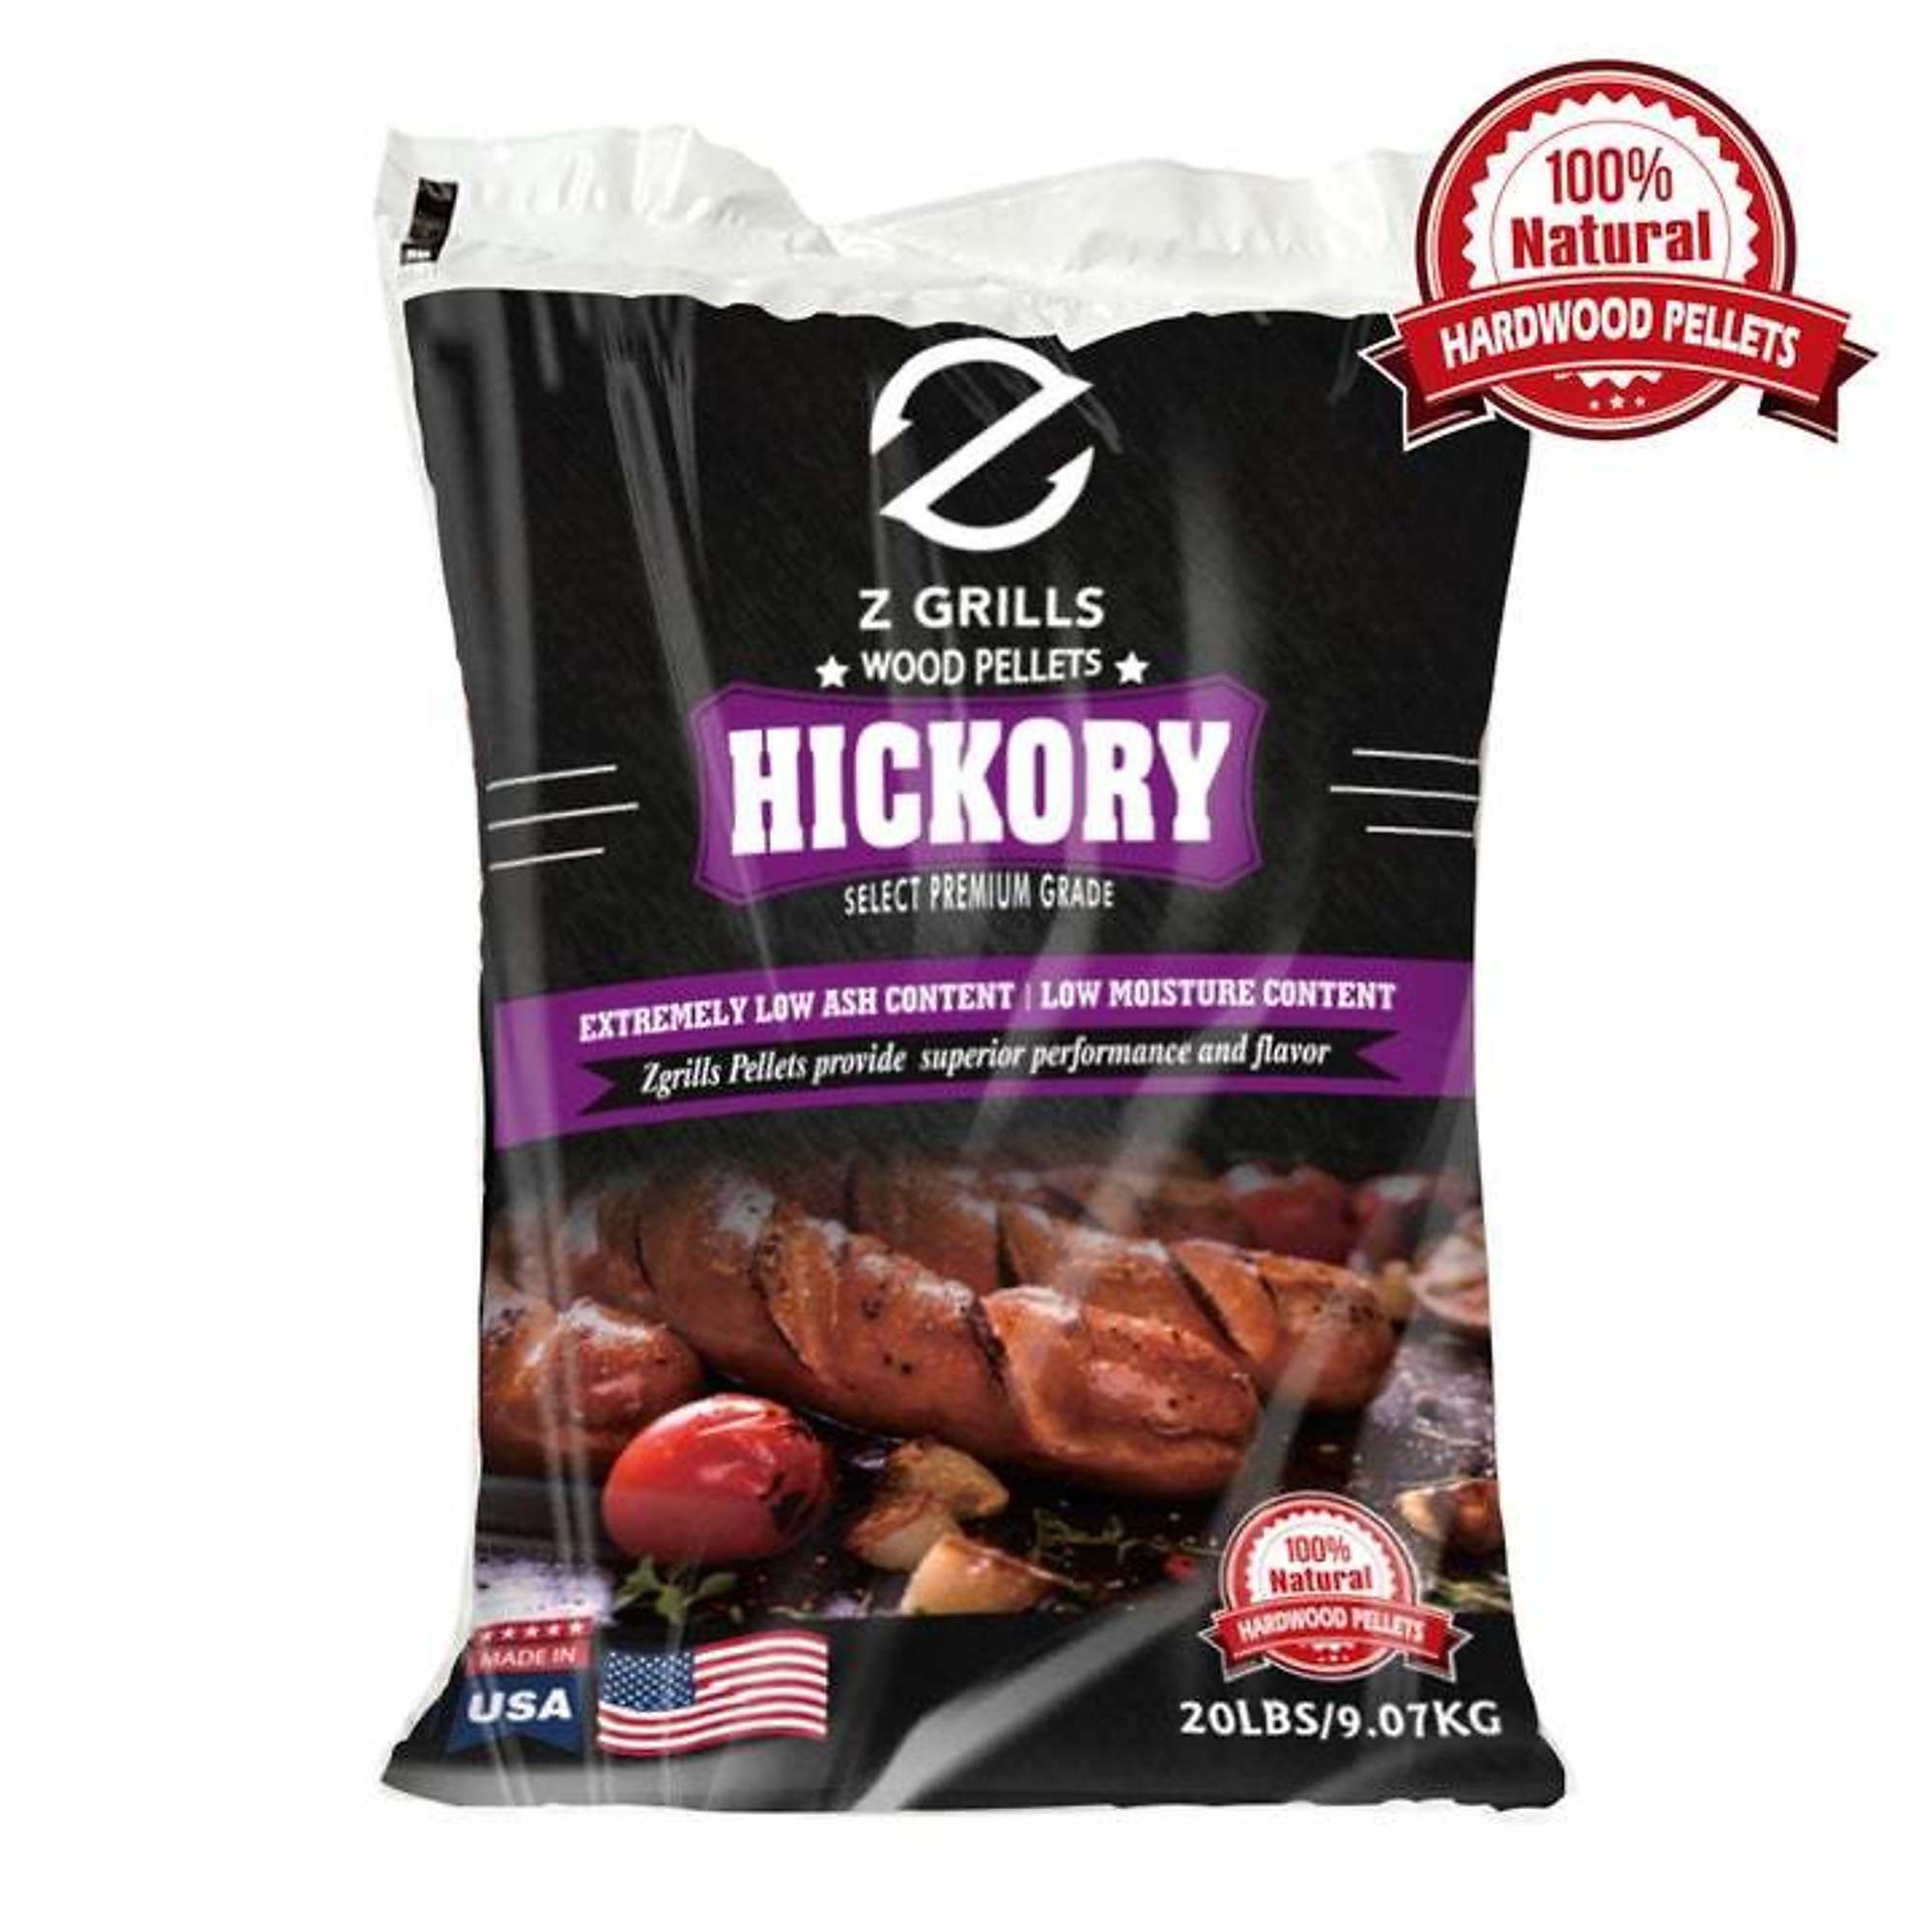 Z Grills, Hickory BBQ Grill Pellets, Model WP-HICKORY-20